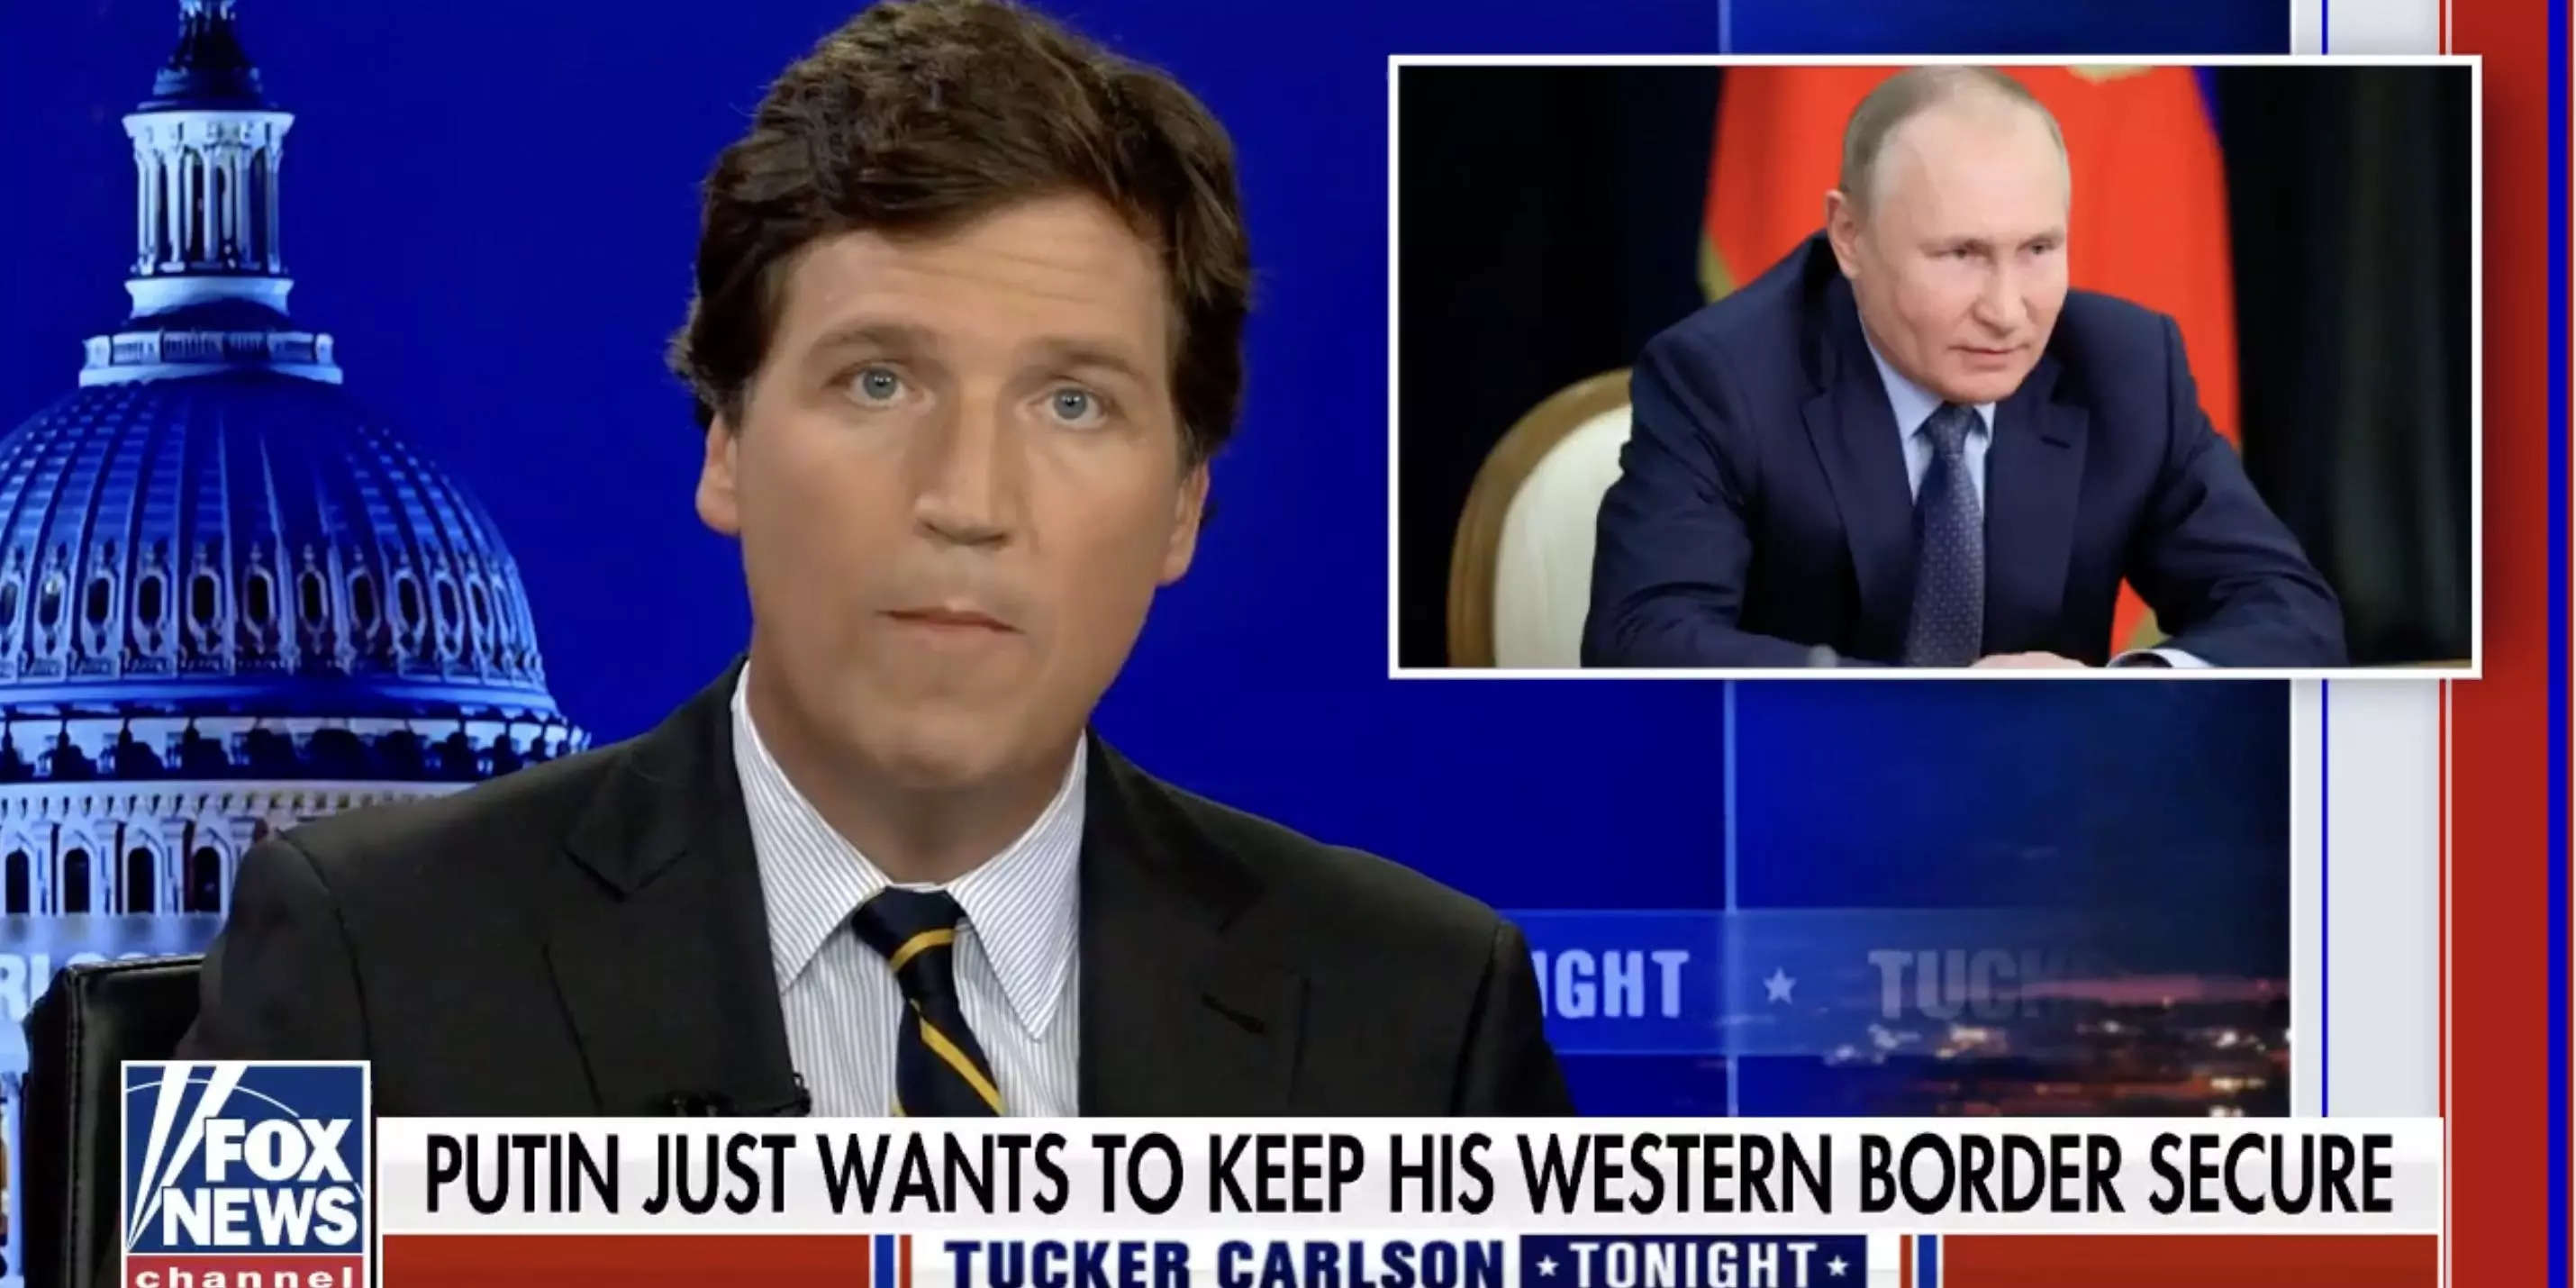 Tucker Carlson told The New York Times he's not a Russian agent